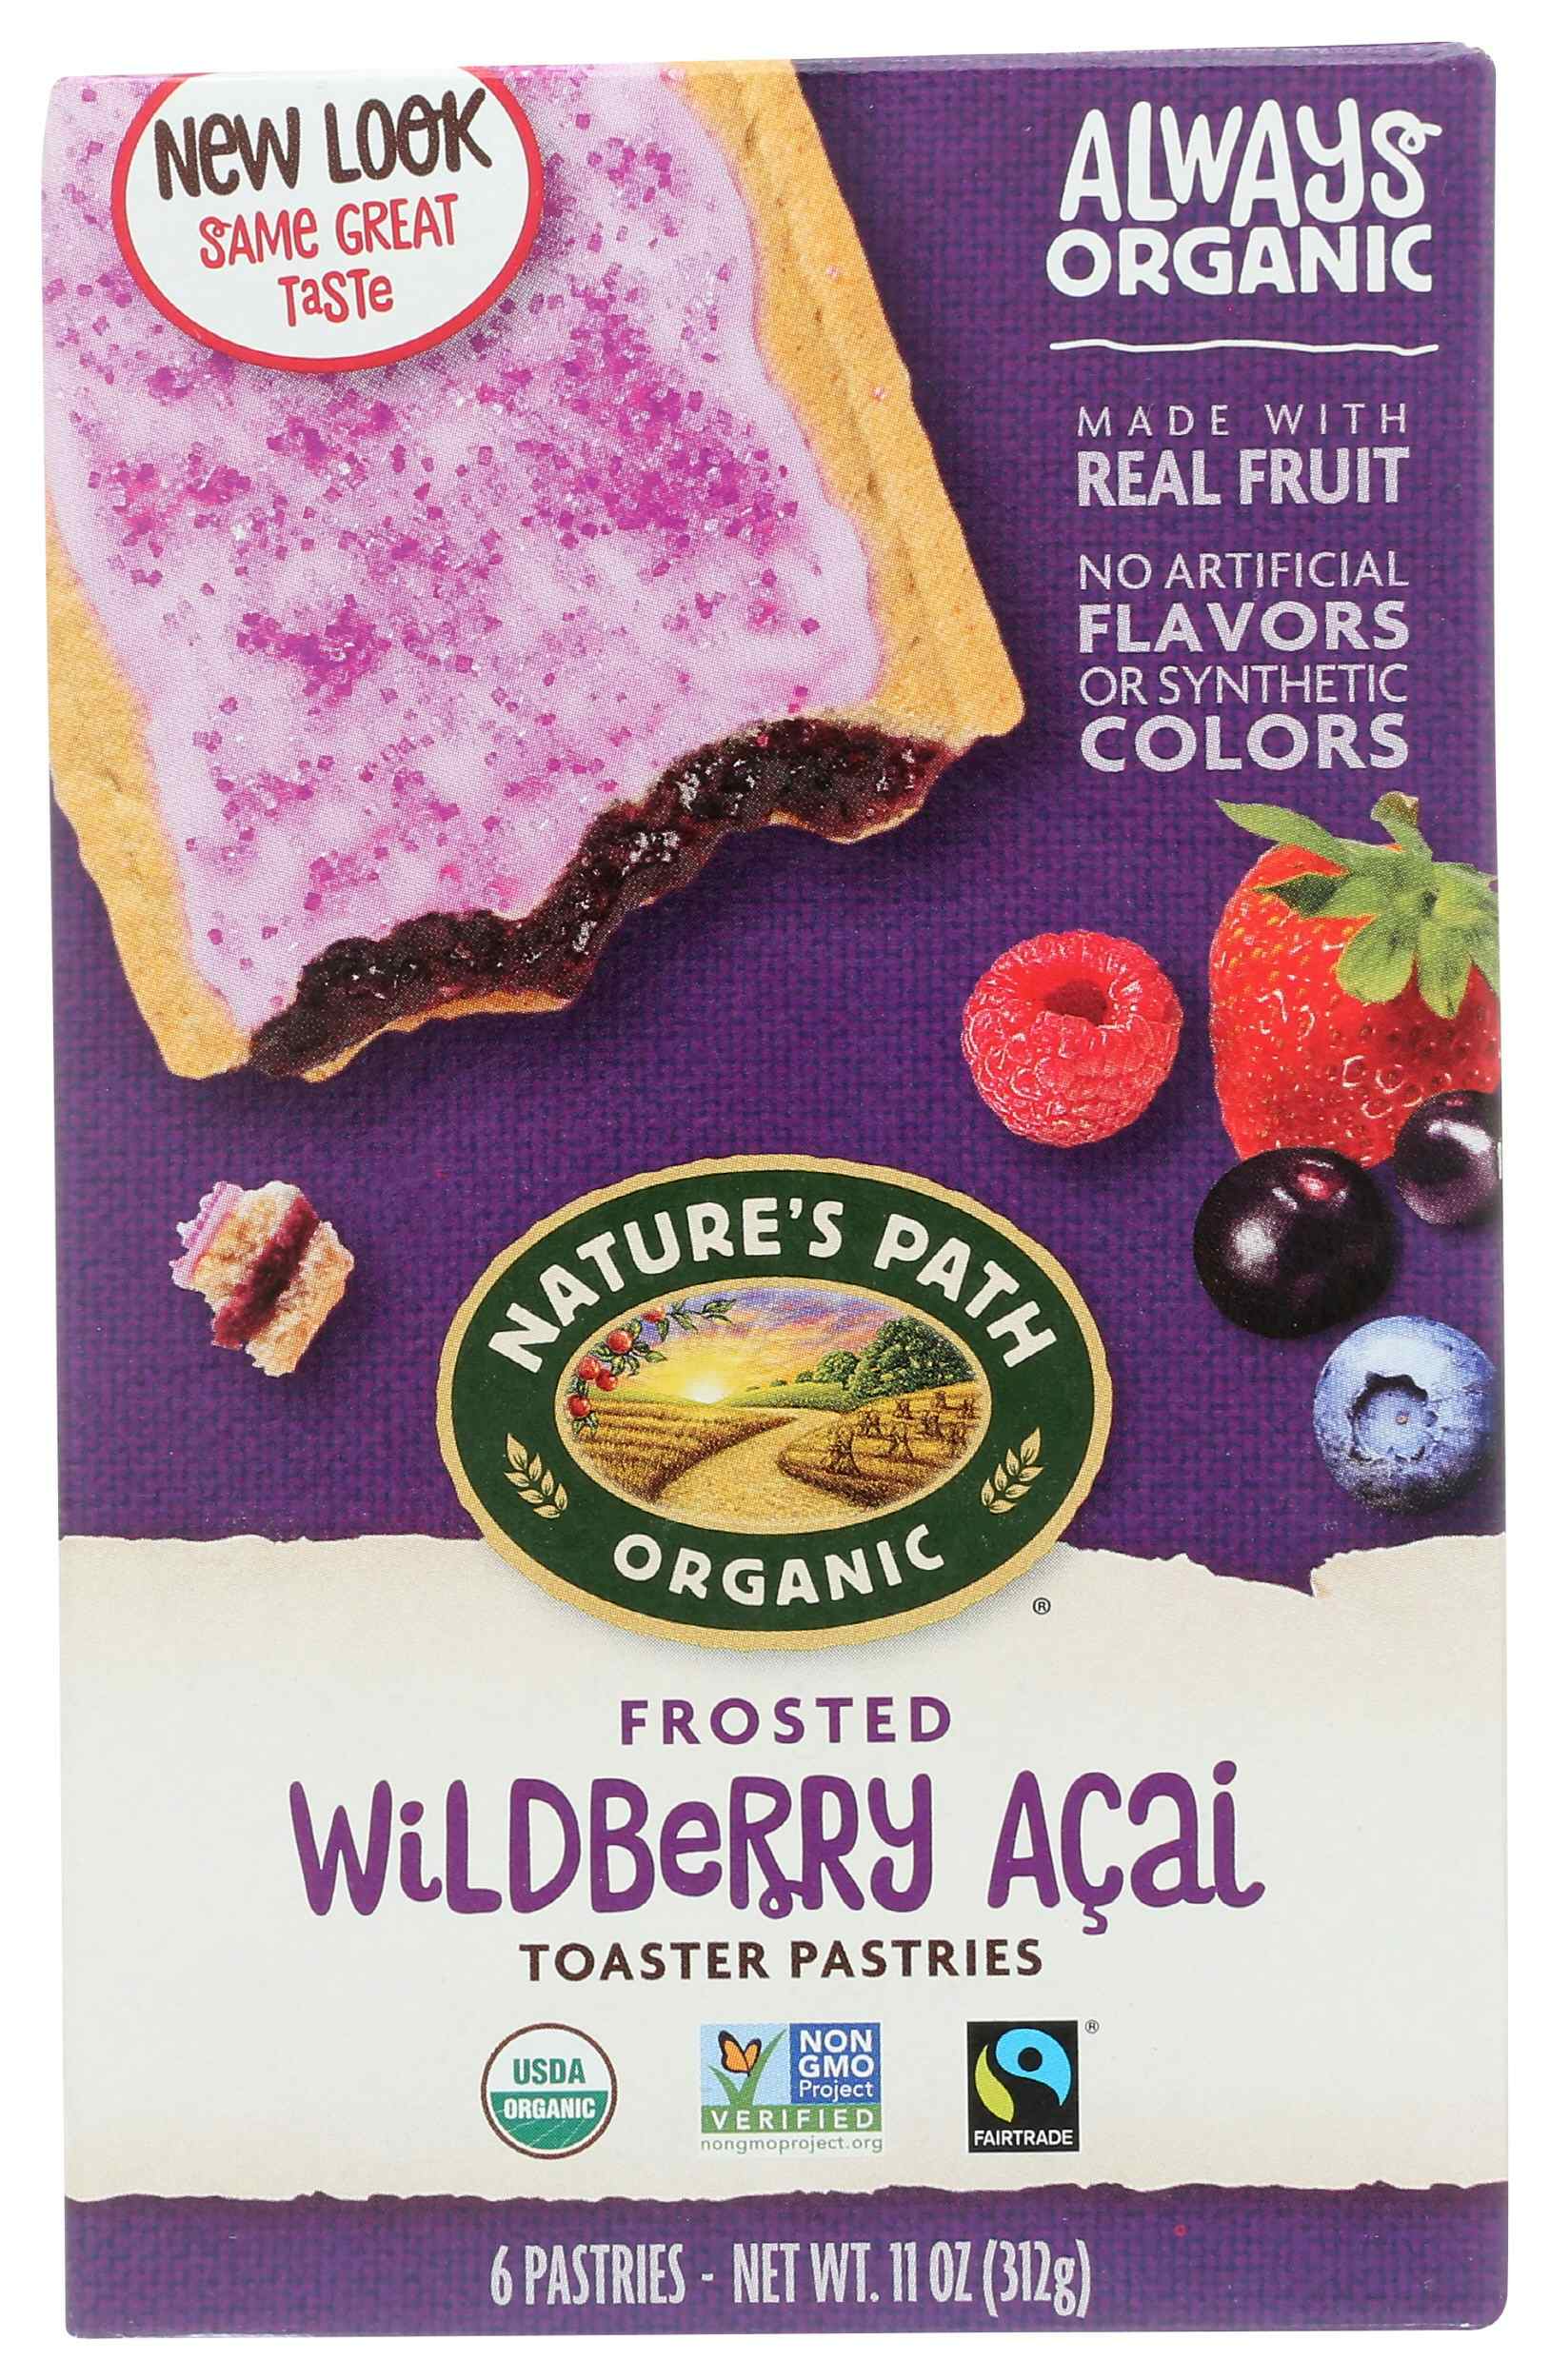 Nature's Path Frosted Wildberry Acai Toaster Pastries